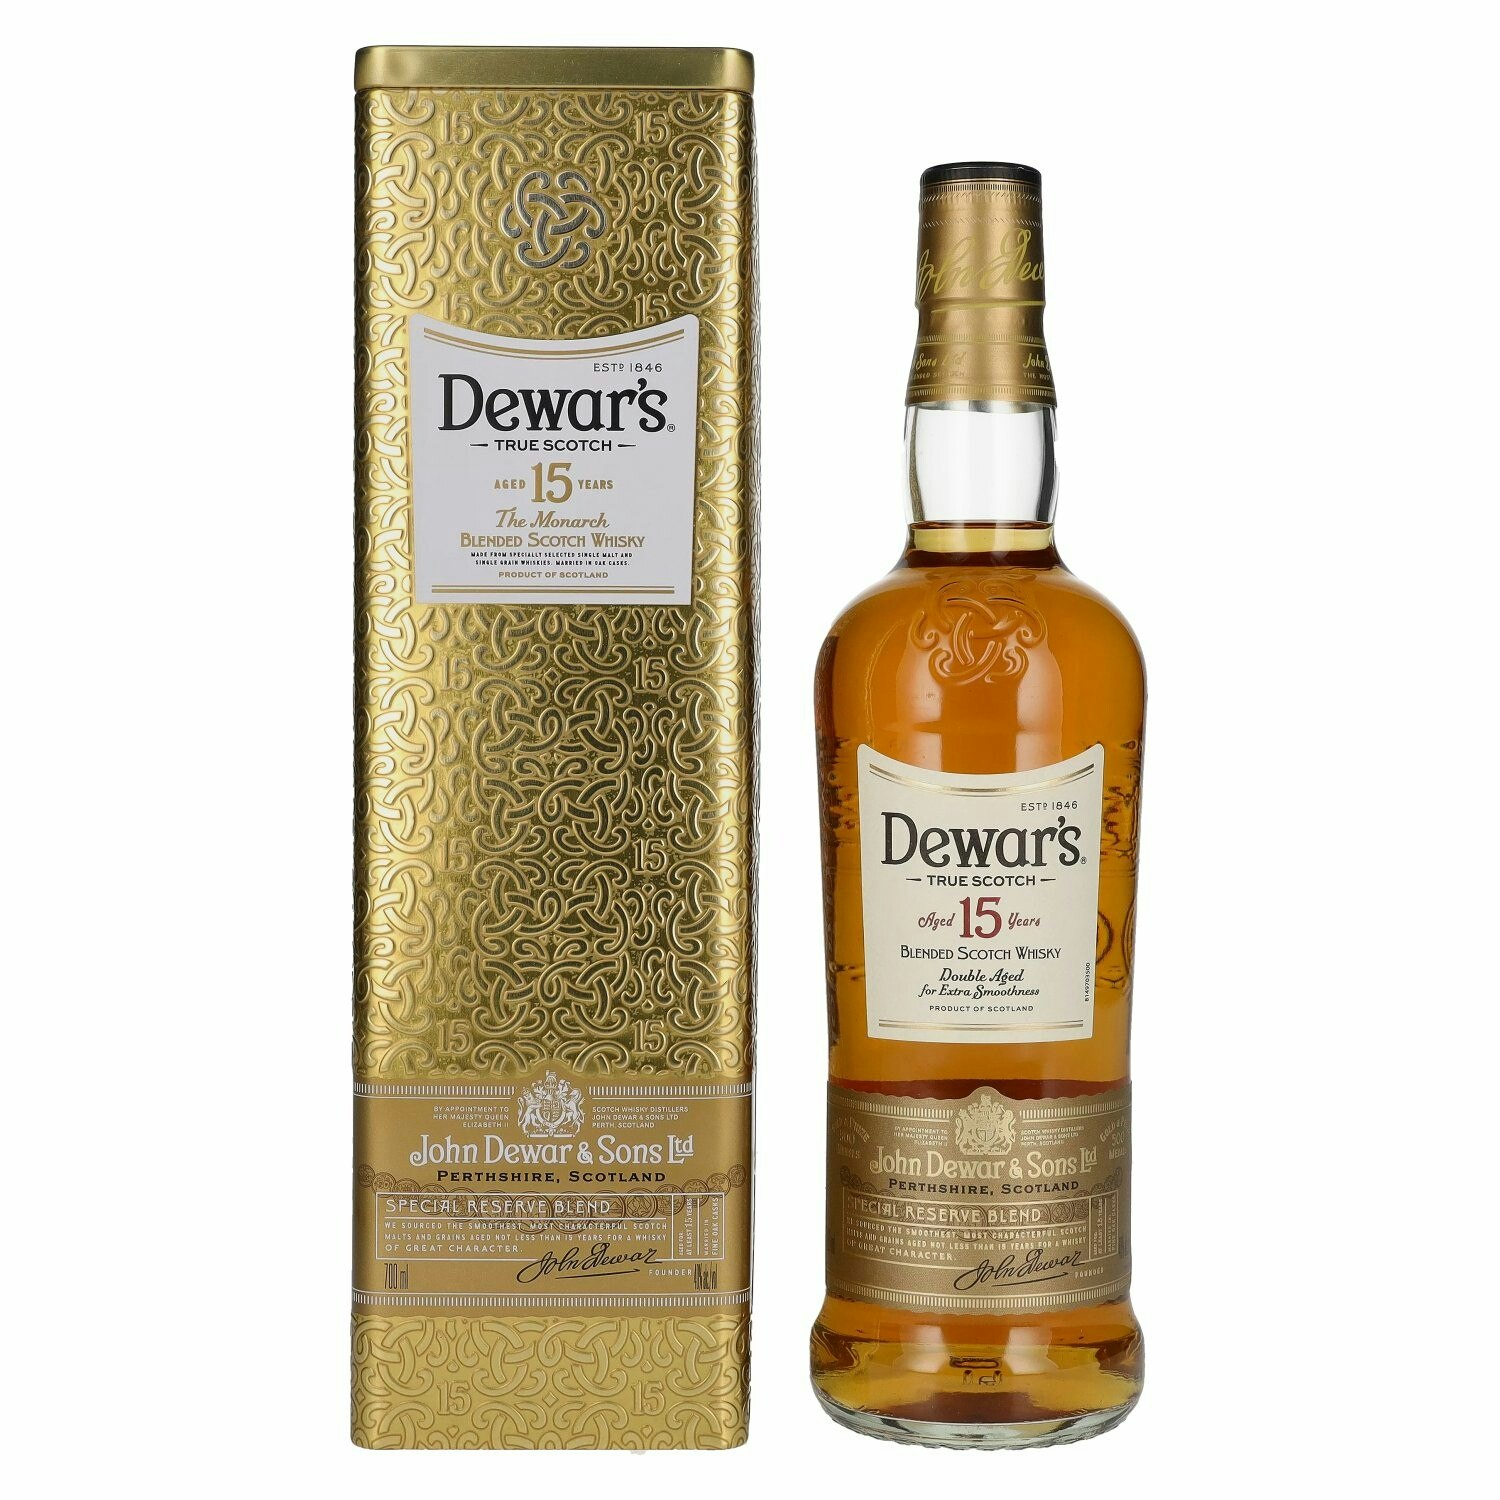 Dewar's 15 Years Old Blended Scotch Whisky 40% Vol. 0,7l in Tinbox